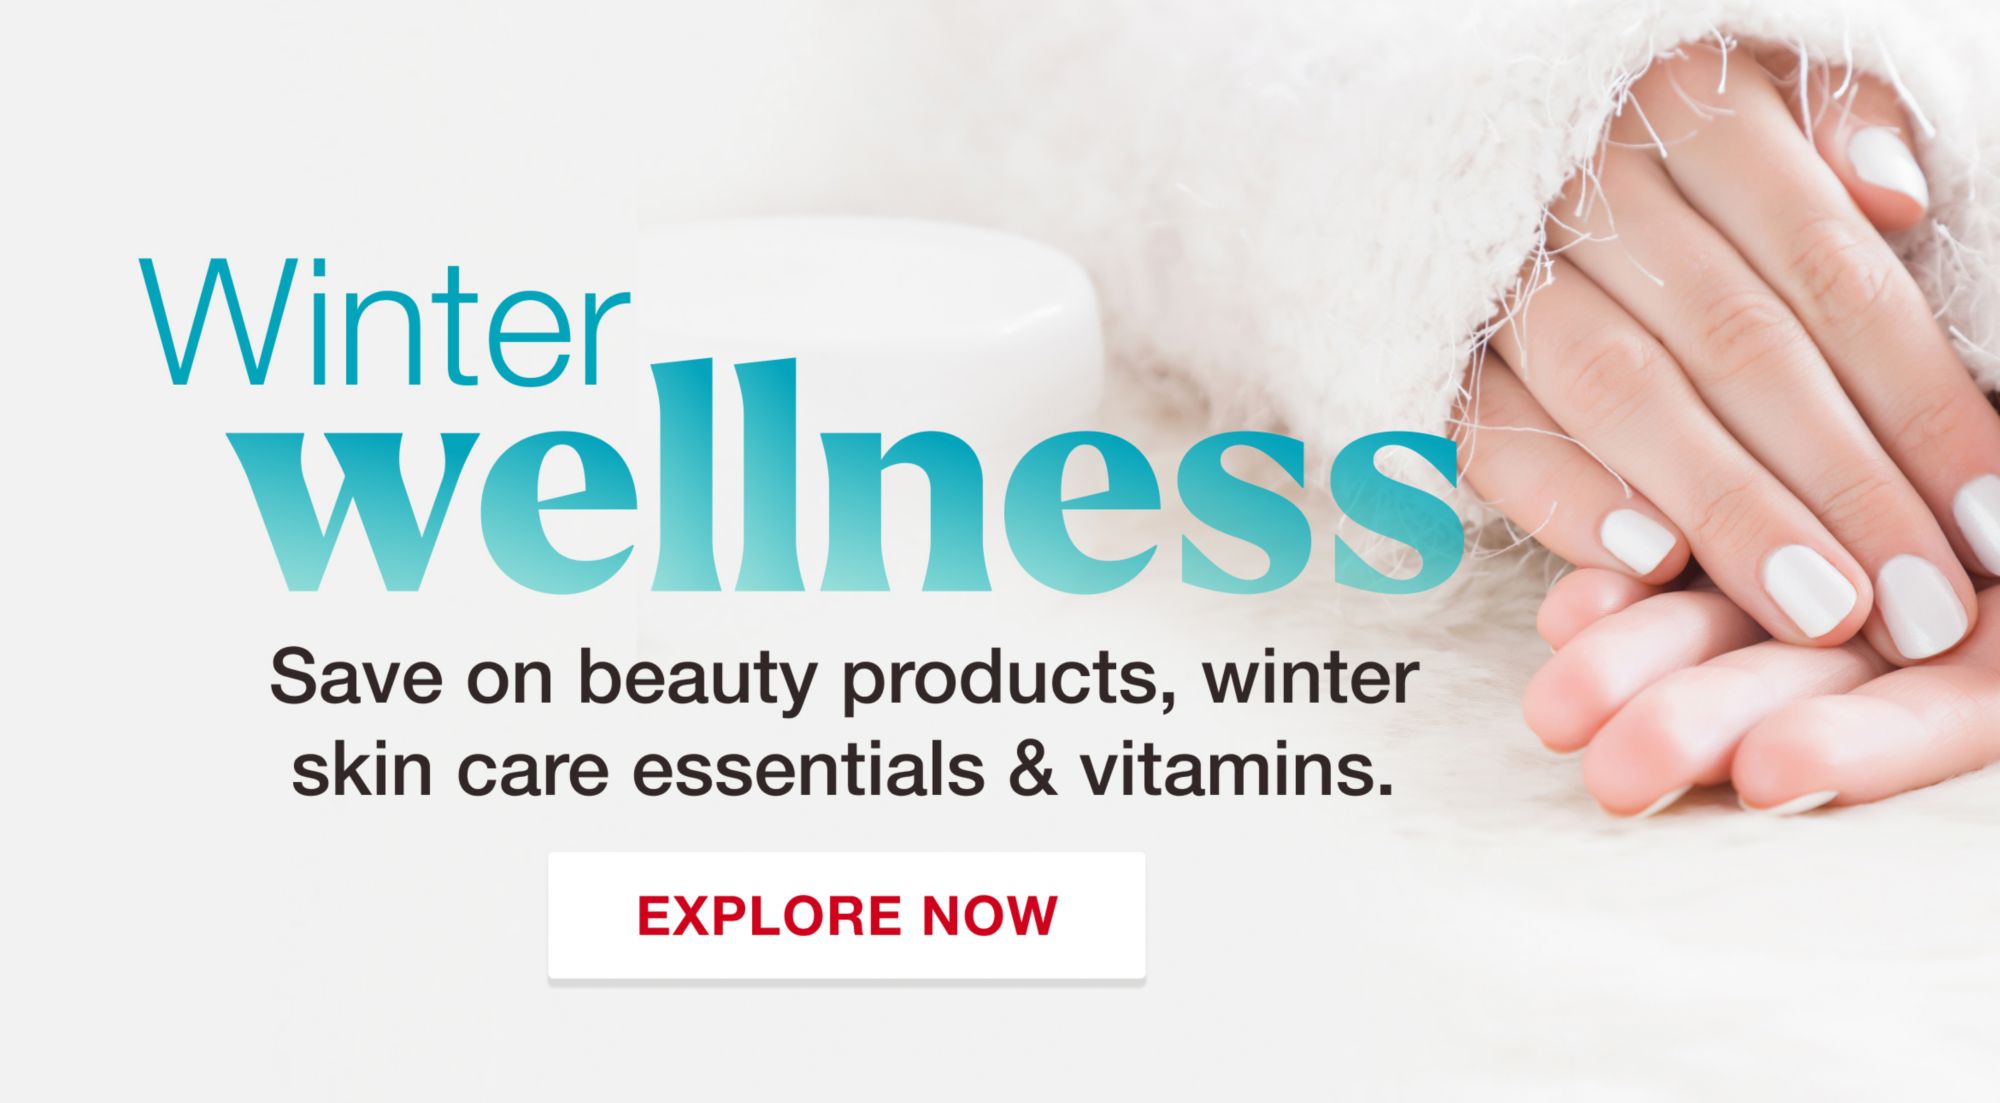 Winter wellness. Save on beauty products, winter skin care essentials and vitamins. Click to explore now